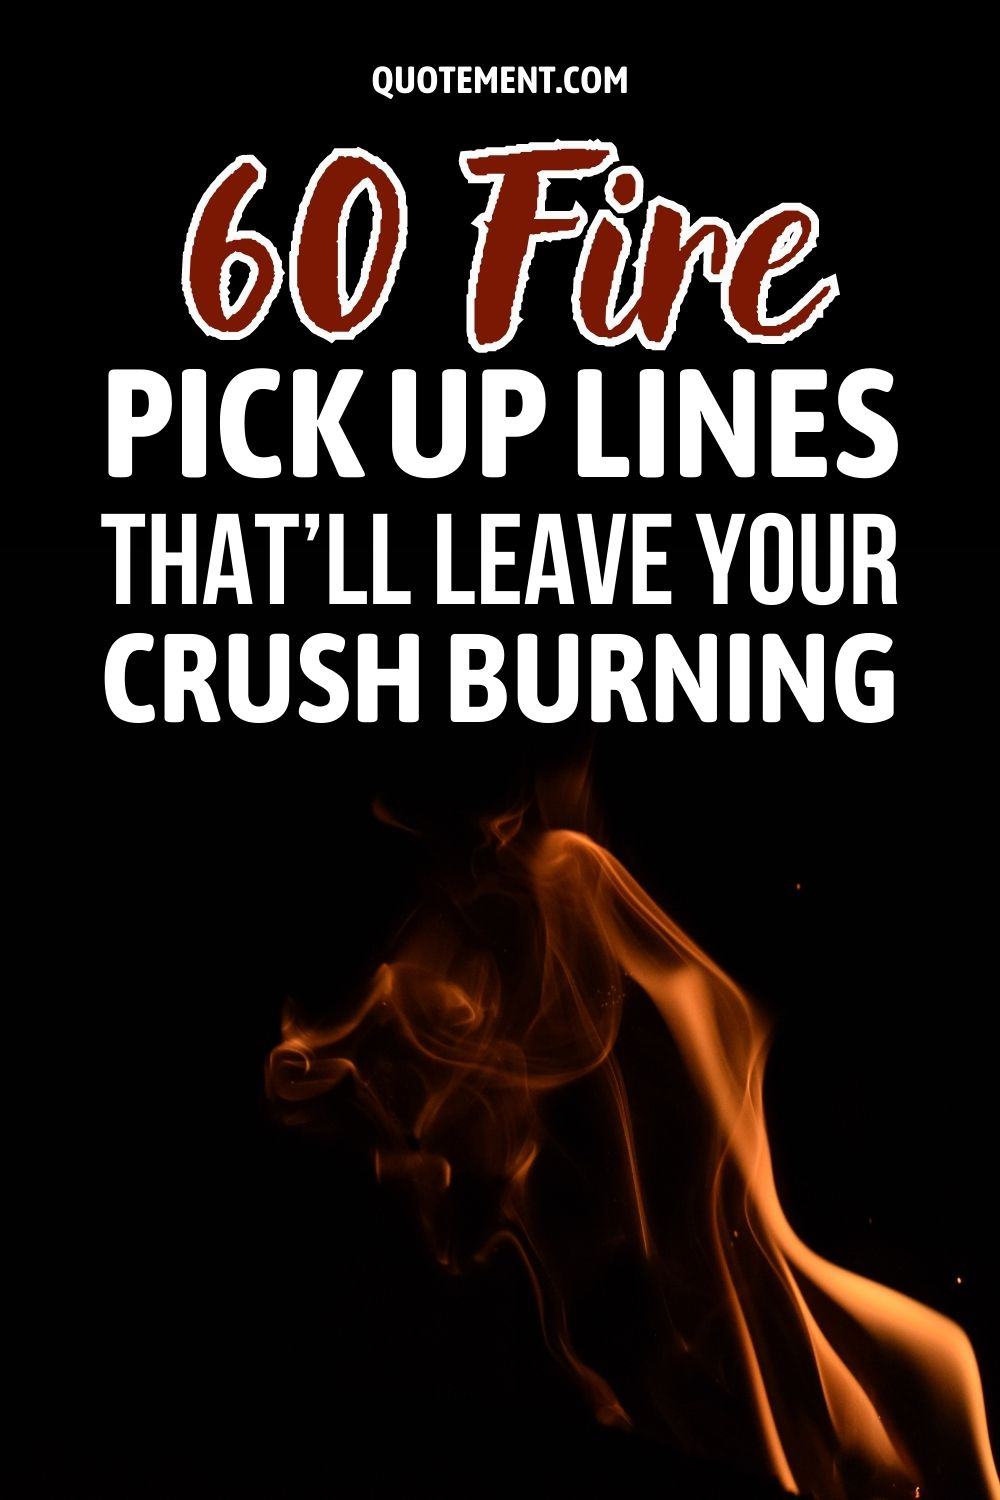 60 Fire Pick Up Lines That’ll Leave Your Crush Burning + pinterest